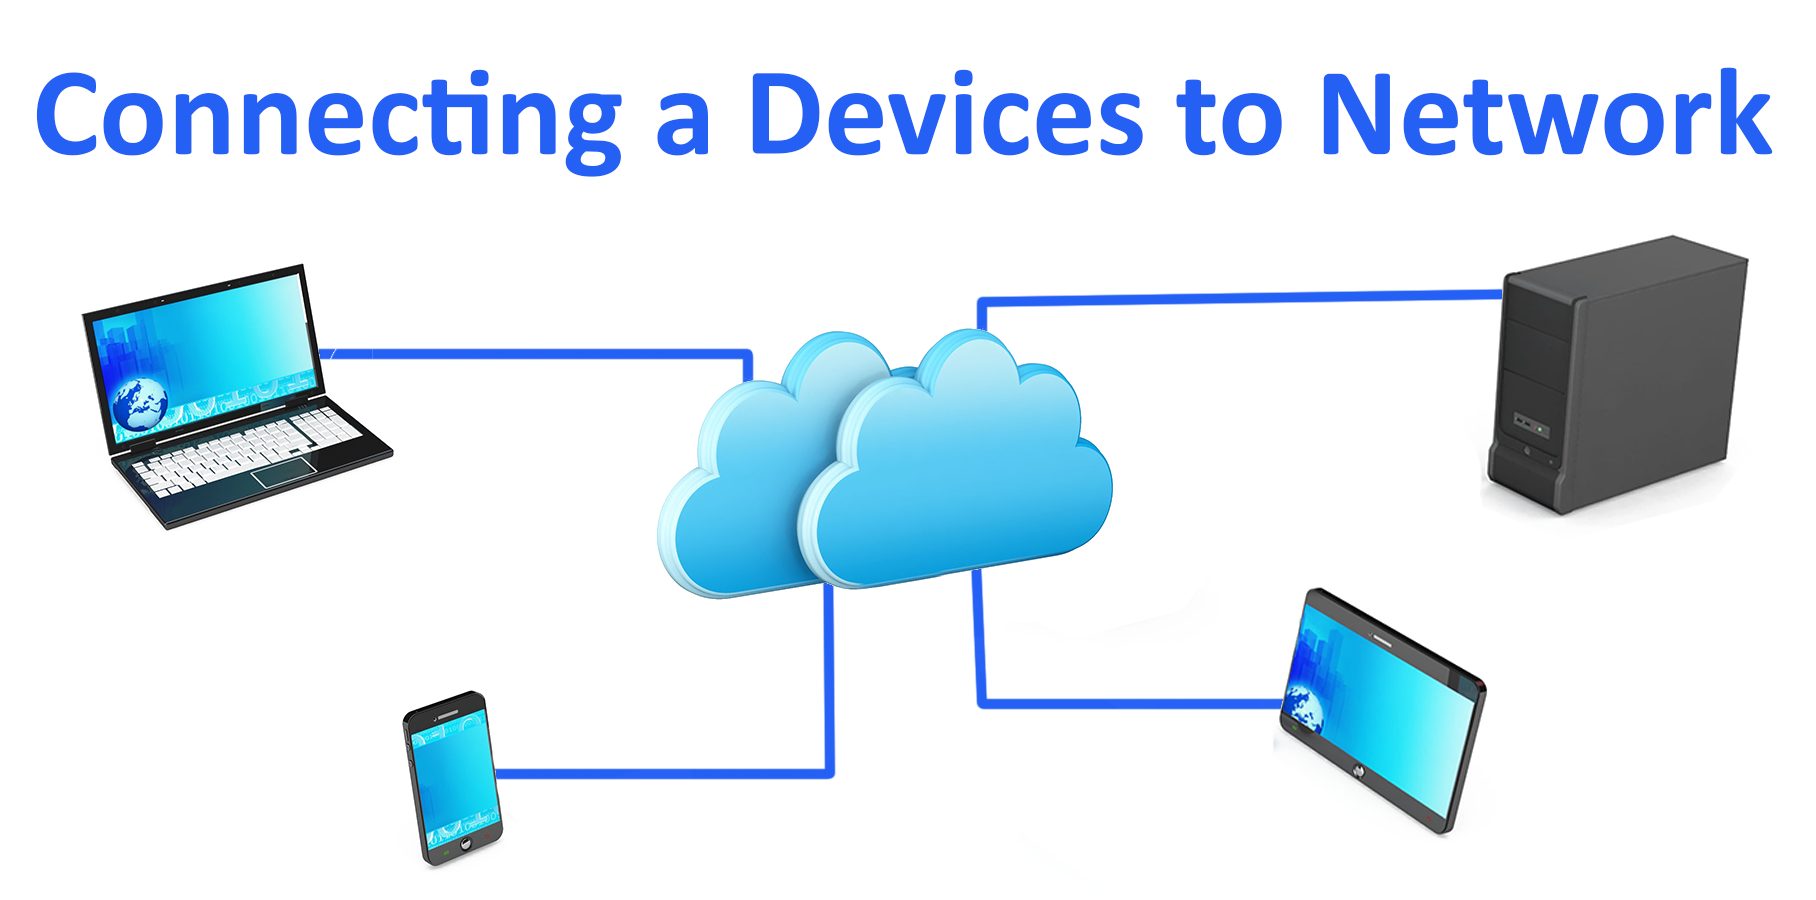 Connecting a Device to the Network